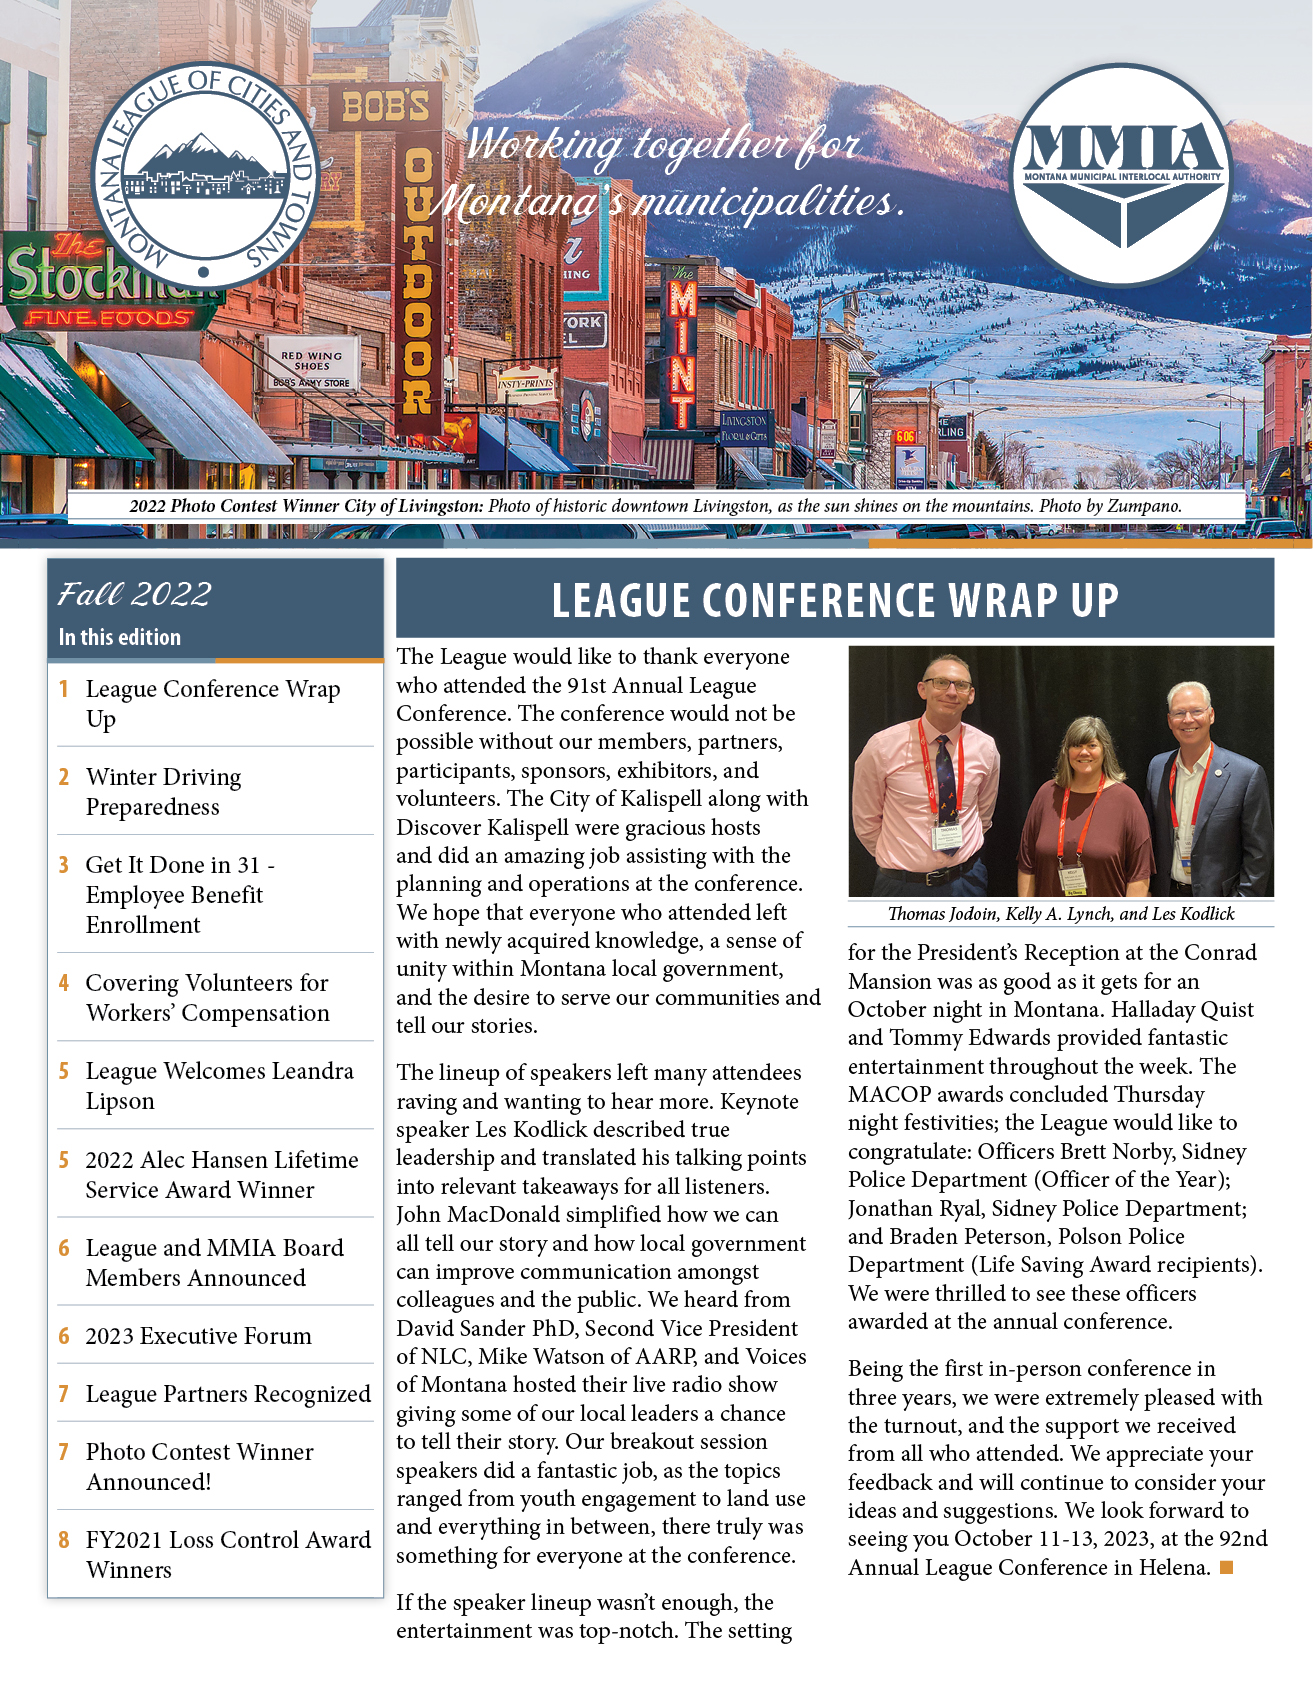 Leauge-MMIA Fall 2022 Newsletter